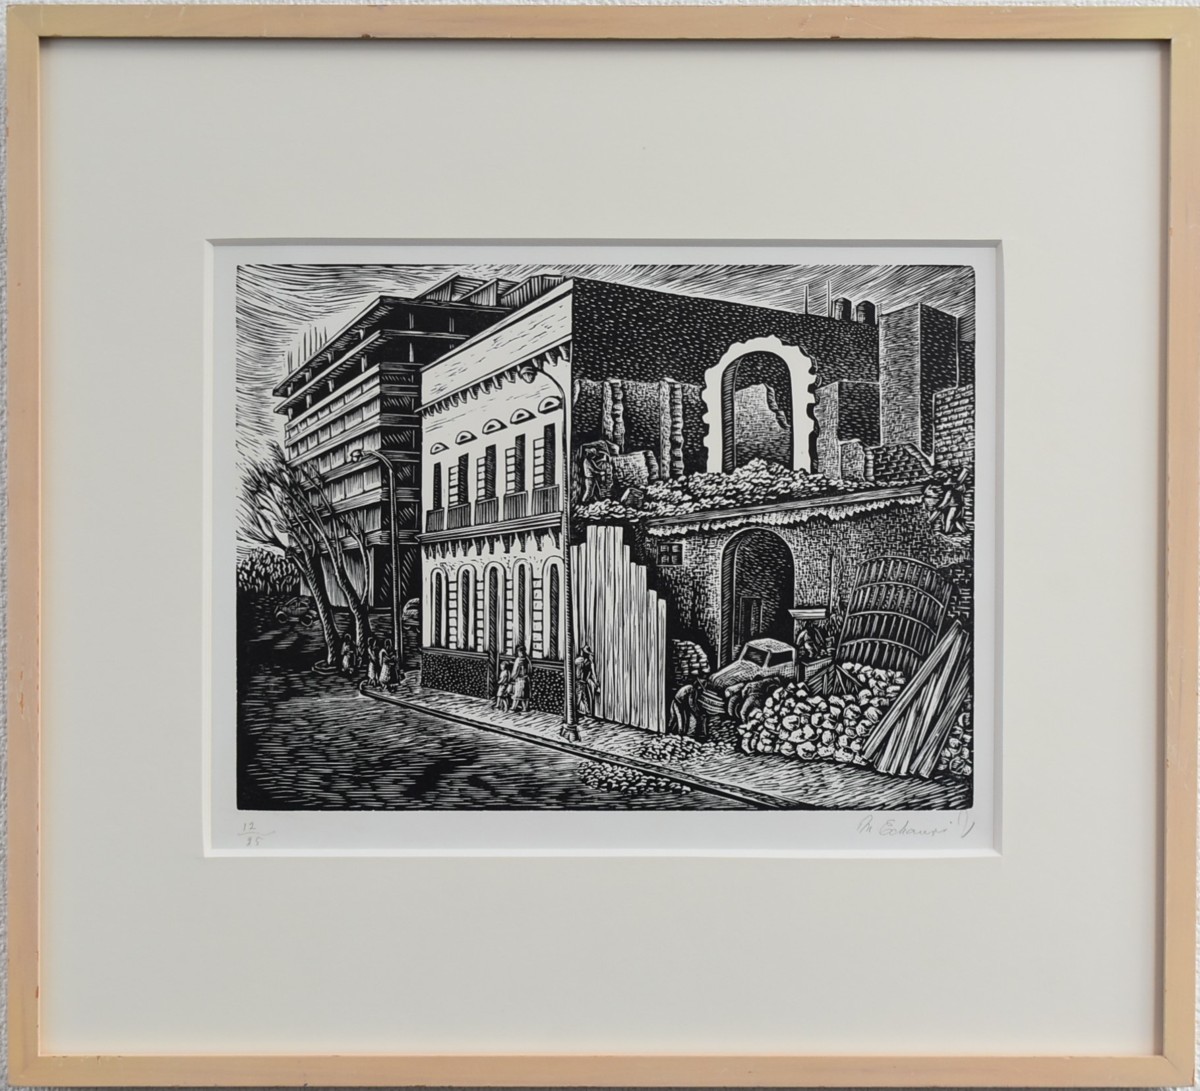 A monochrome print that is easy to display! Manuel Echauri Building Woodblock print Limited to 25 copies [Seiko Gallery], Artwork, Prints, woodblock print